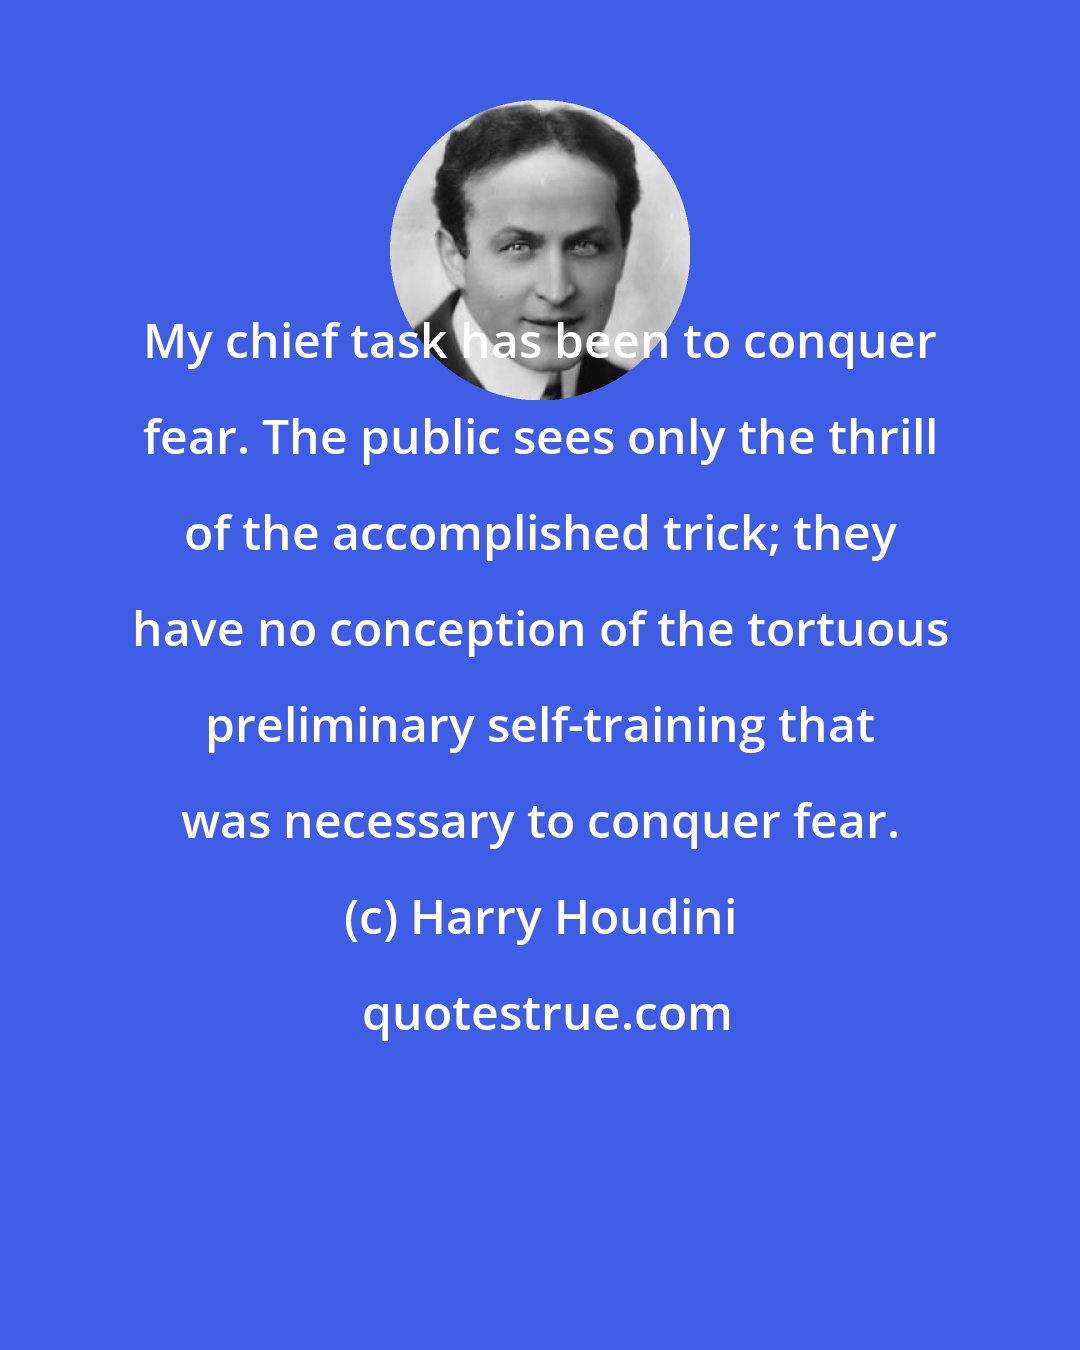 Harry Houdini: My chief task has been to conquer fear. The public sees only the thrill of the accomplished trick; they have no conception of the tortuous preliminary self-training that was necessary to conquer fear.